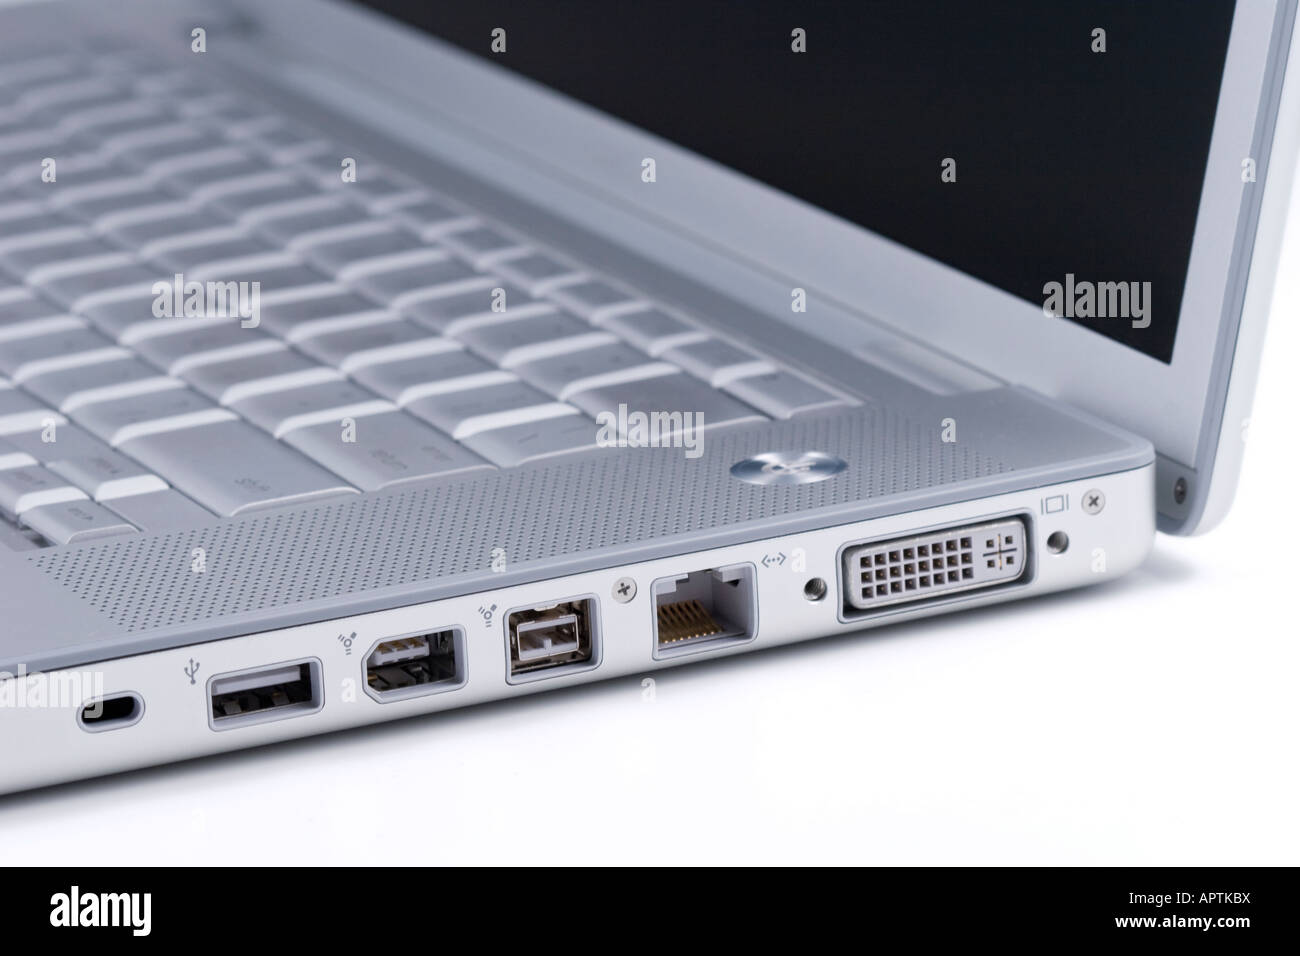 Side of laptop showing connector ports and keyboard Stock Photo